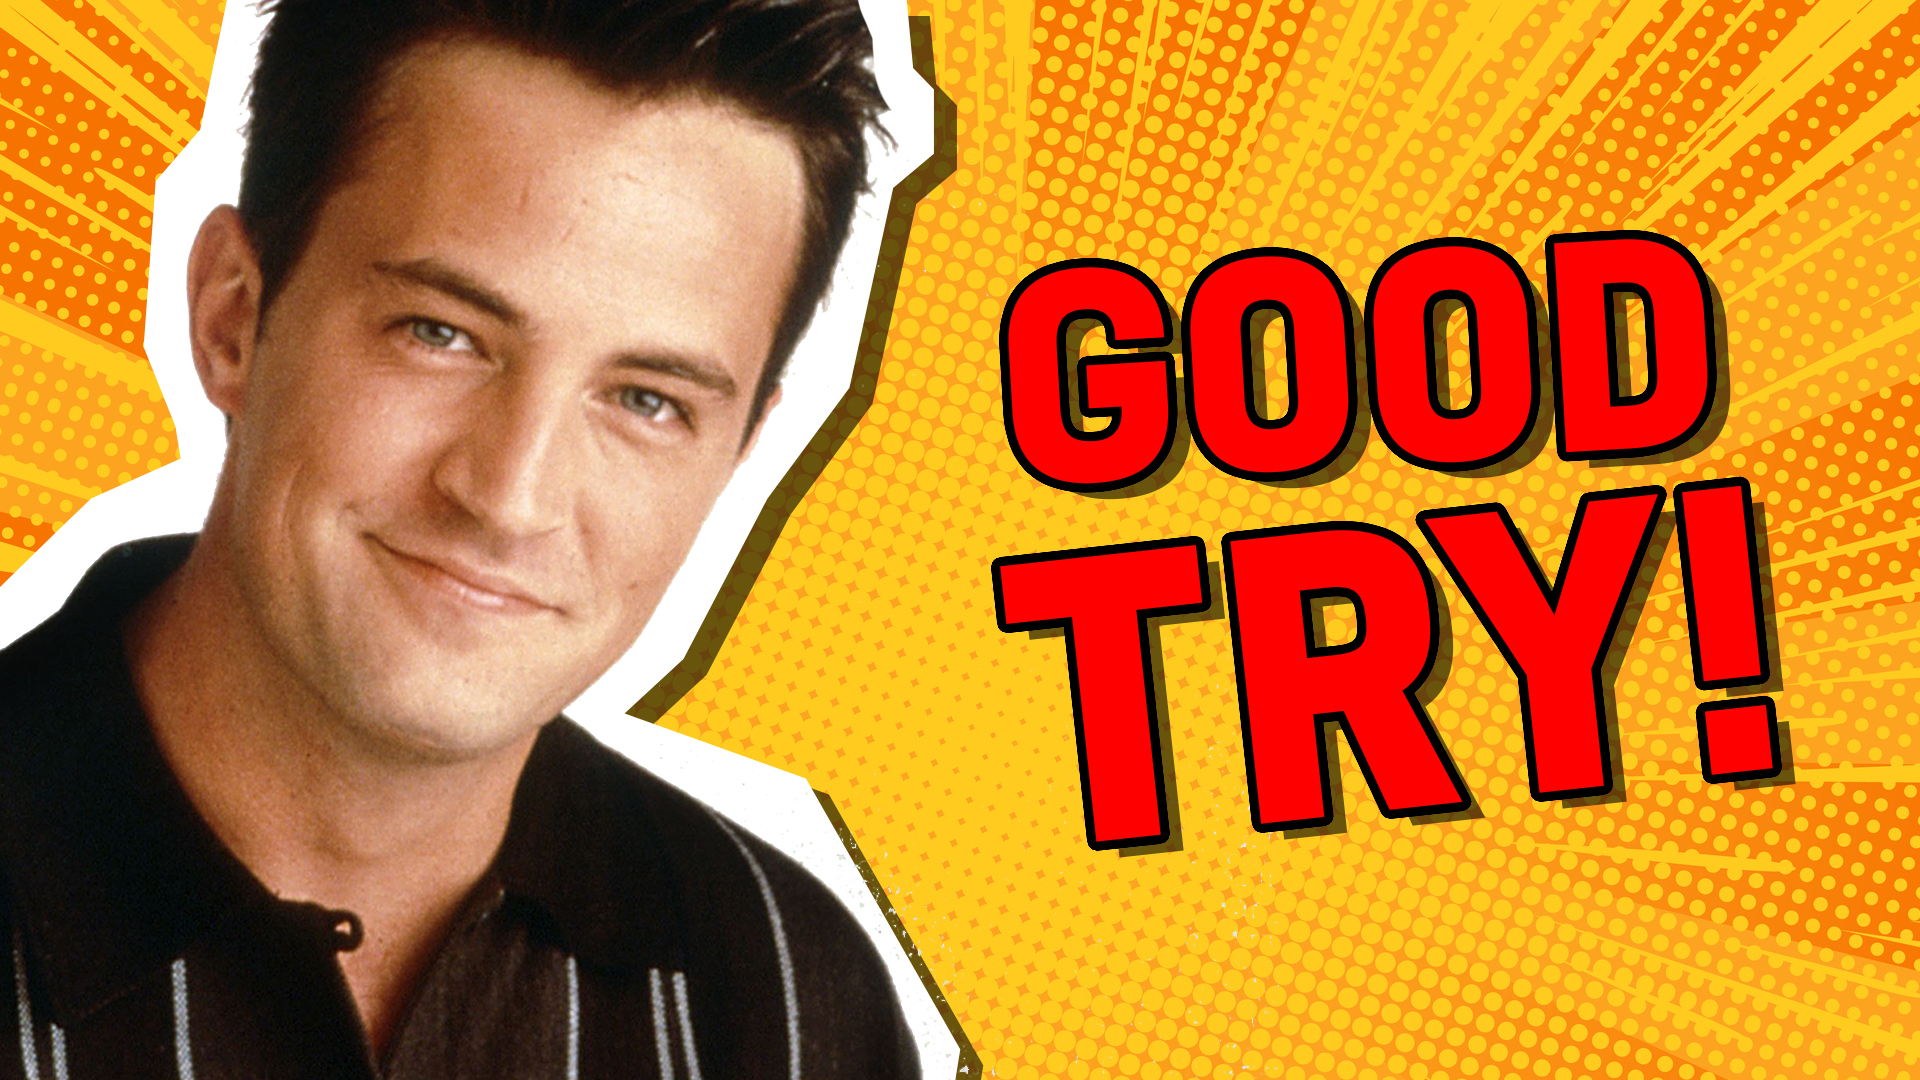 Chandler Bing says 'Good try!' | friends who said it quiz!